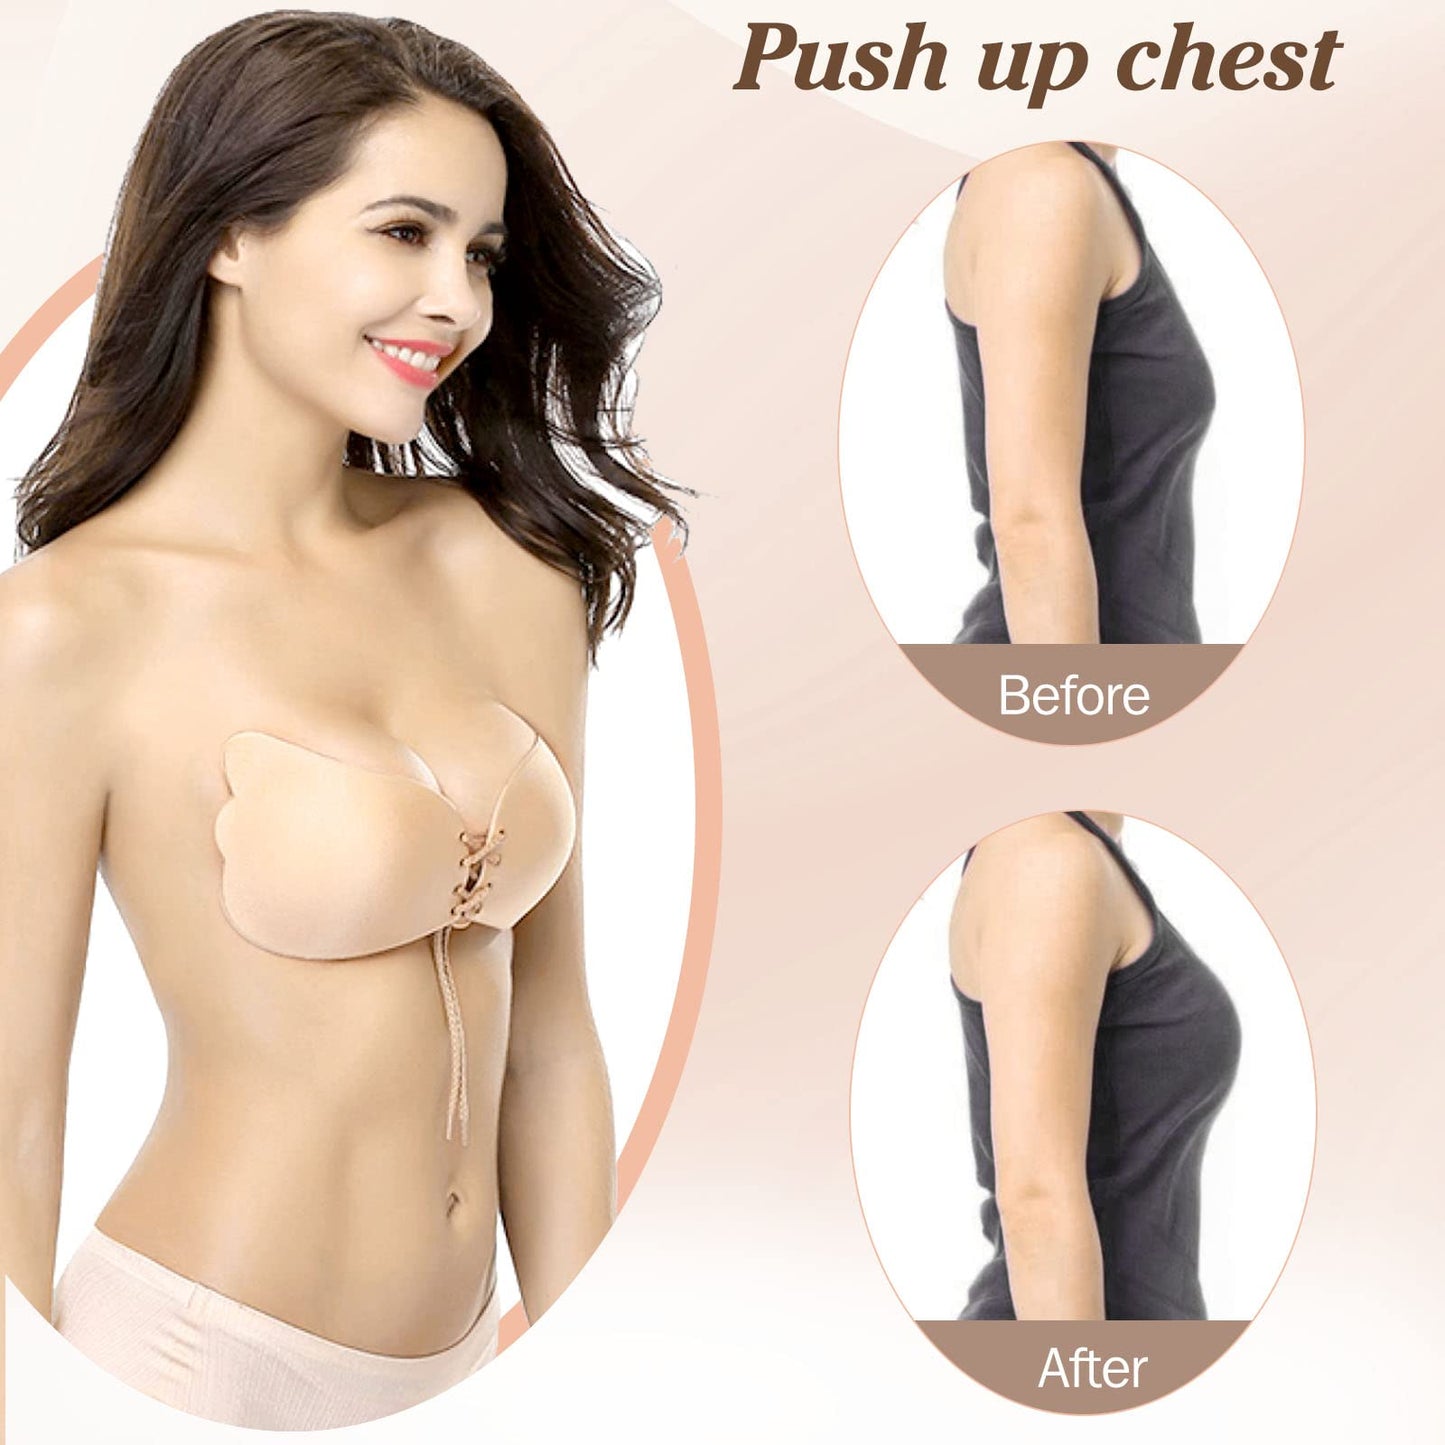 Reusable sticky bra recommendations for DDD. Anyone have positive